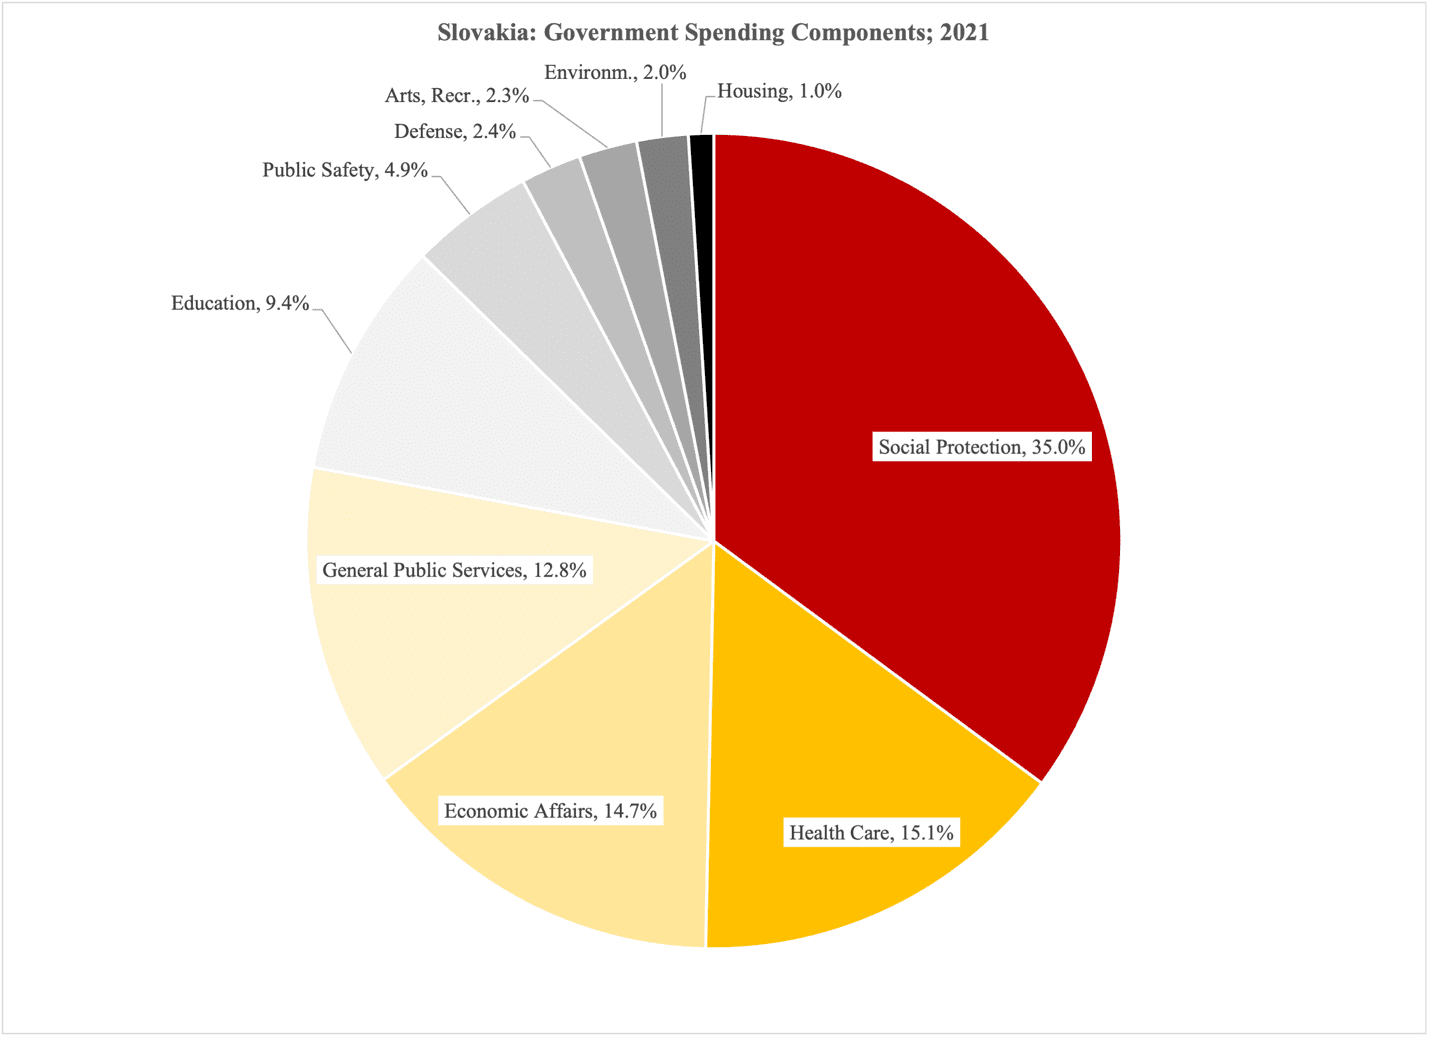 A pie chart with different colored circles

Description automatically generated